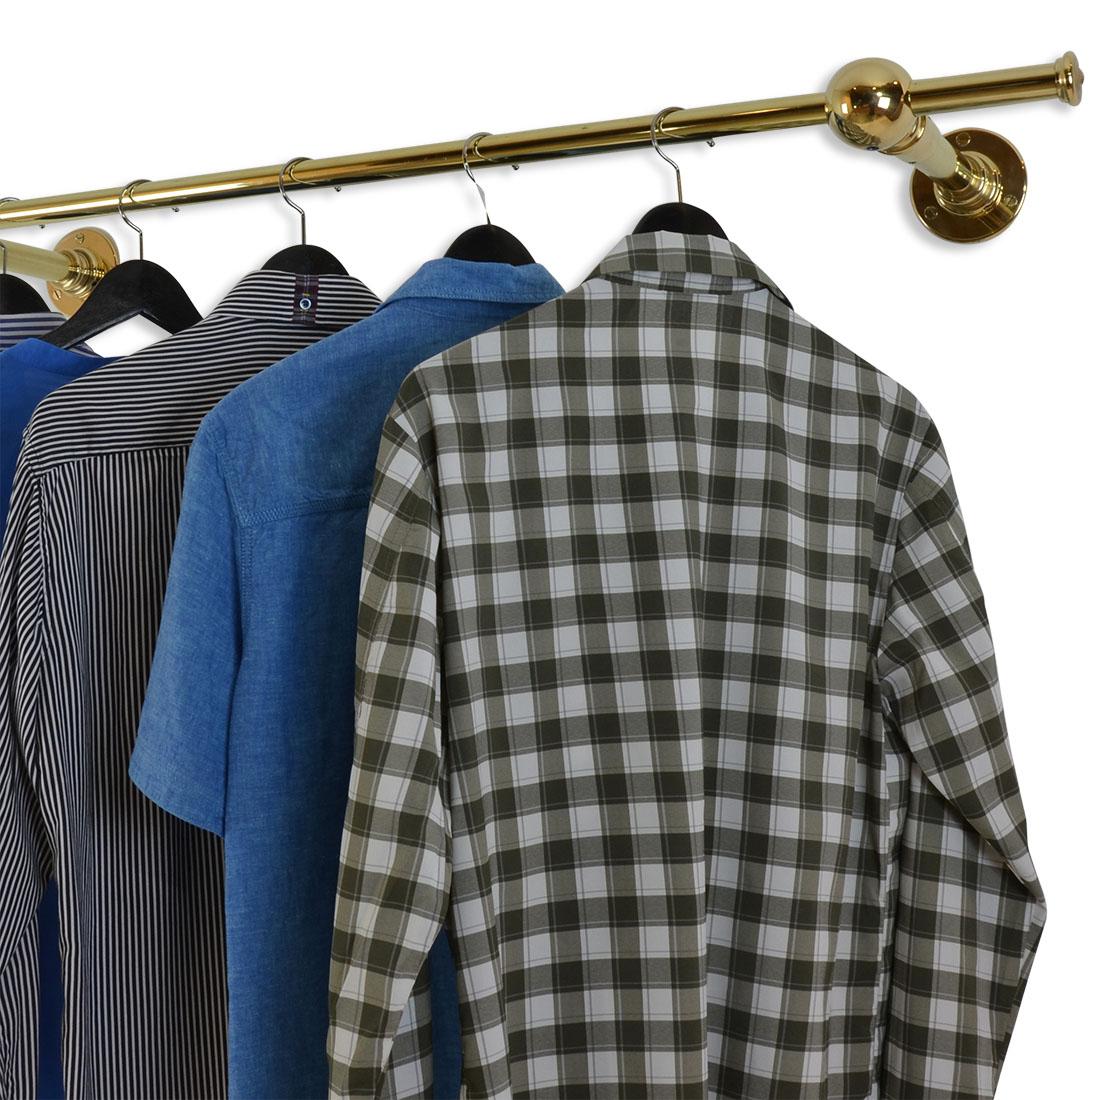 solid clothes rail